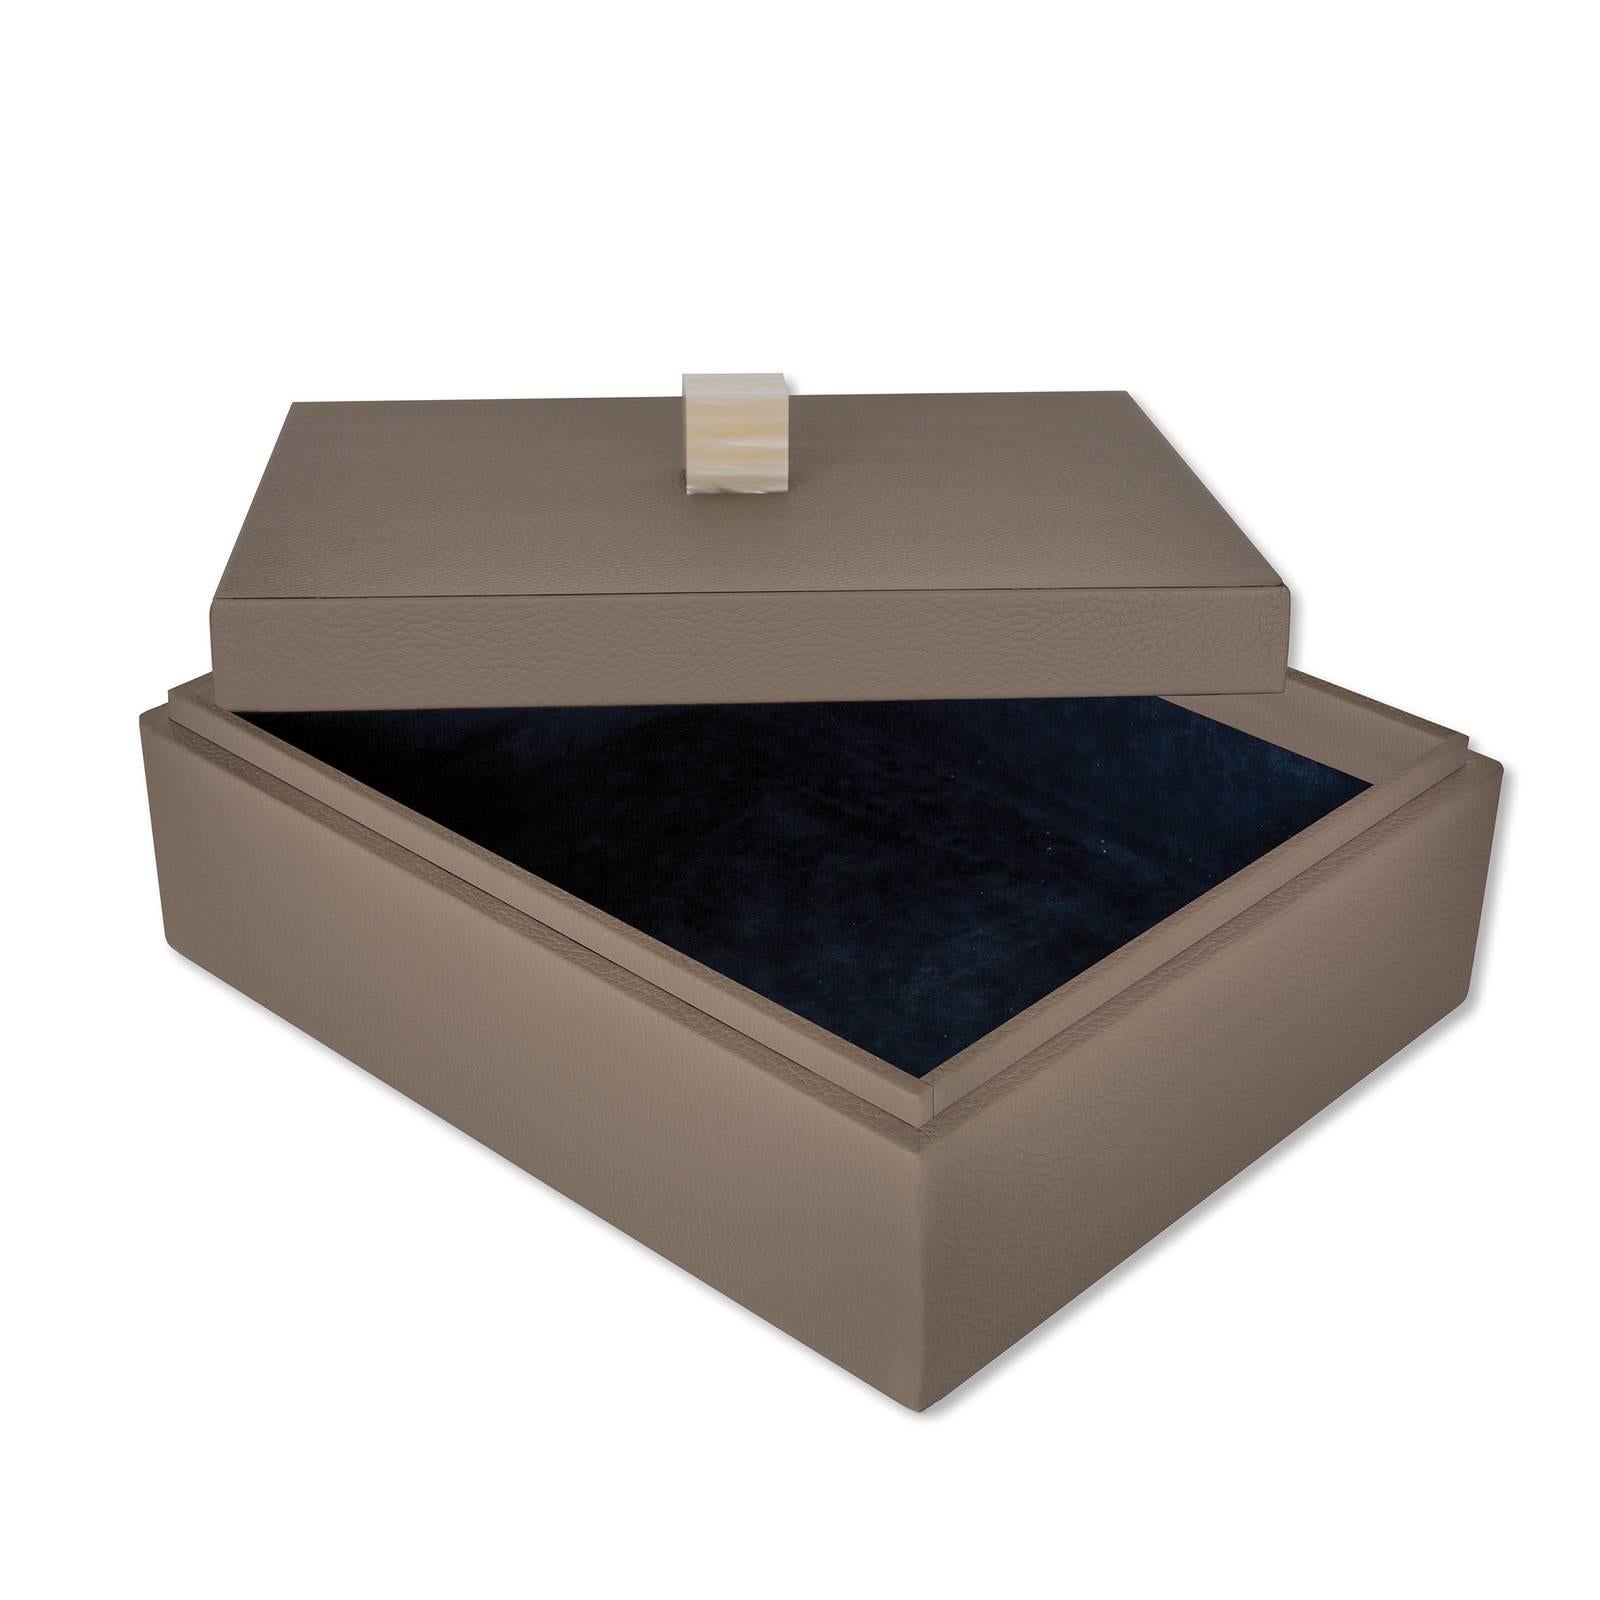 Versatile and sophisticated, this elegant box is a precious addition to any modern or contemporary home. Crafted of wood, its rectangular silhouette and lid are covered by hand with brown fine grain leather. Available in five different colors, this